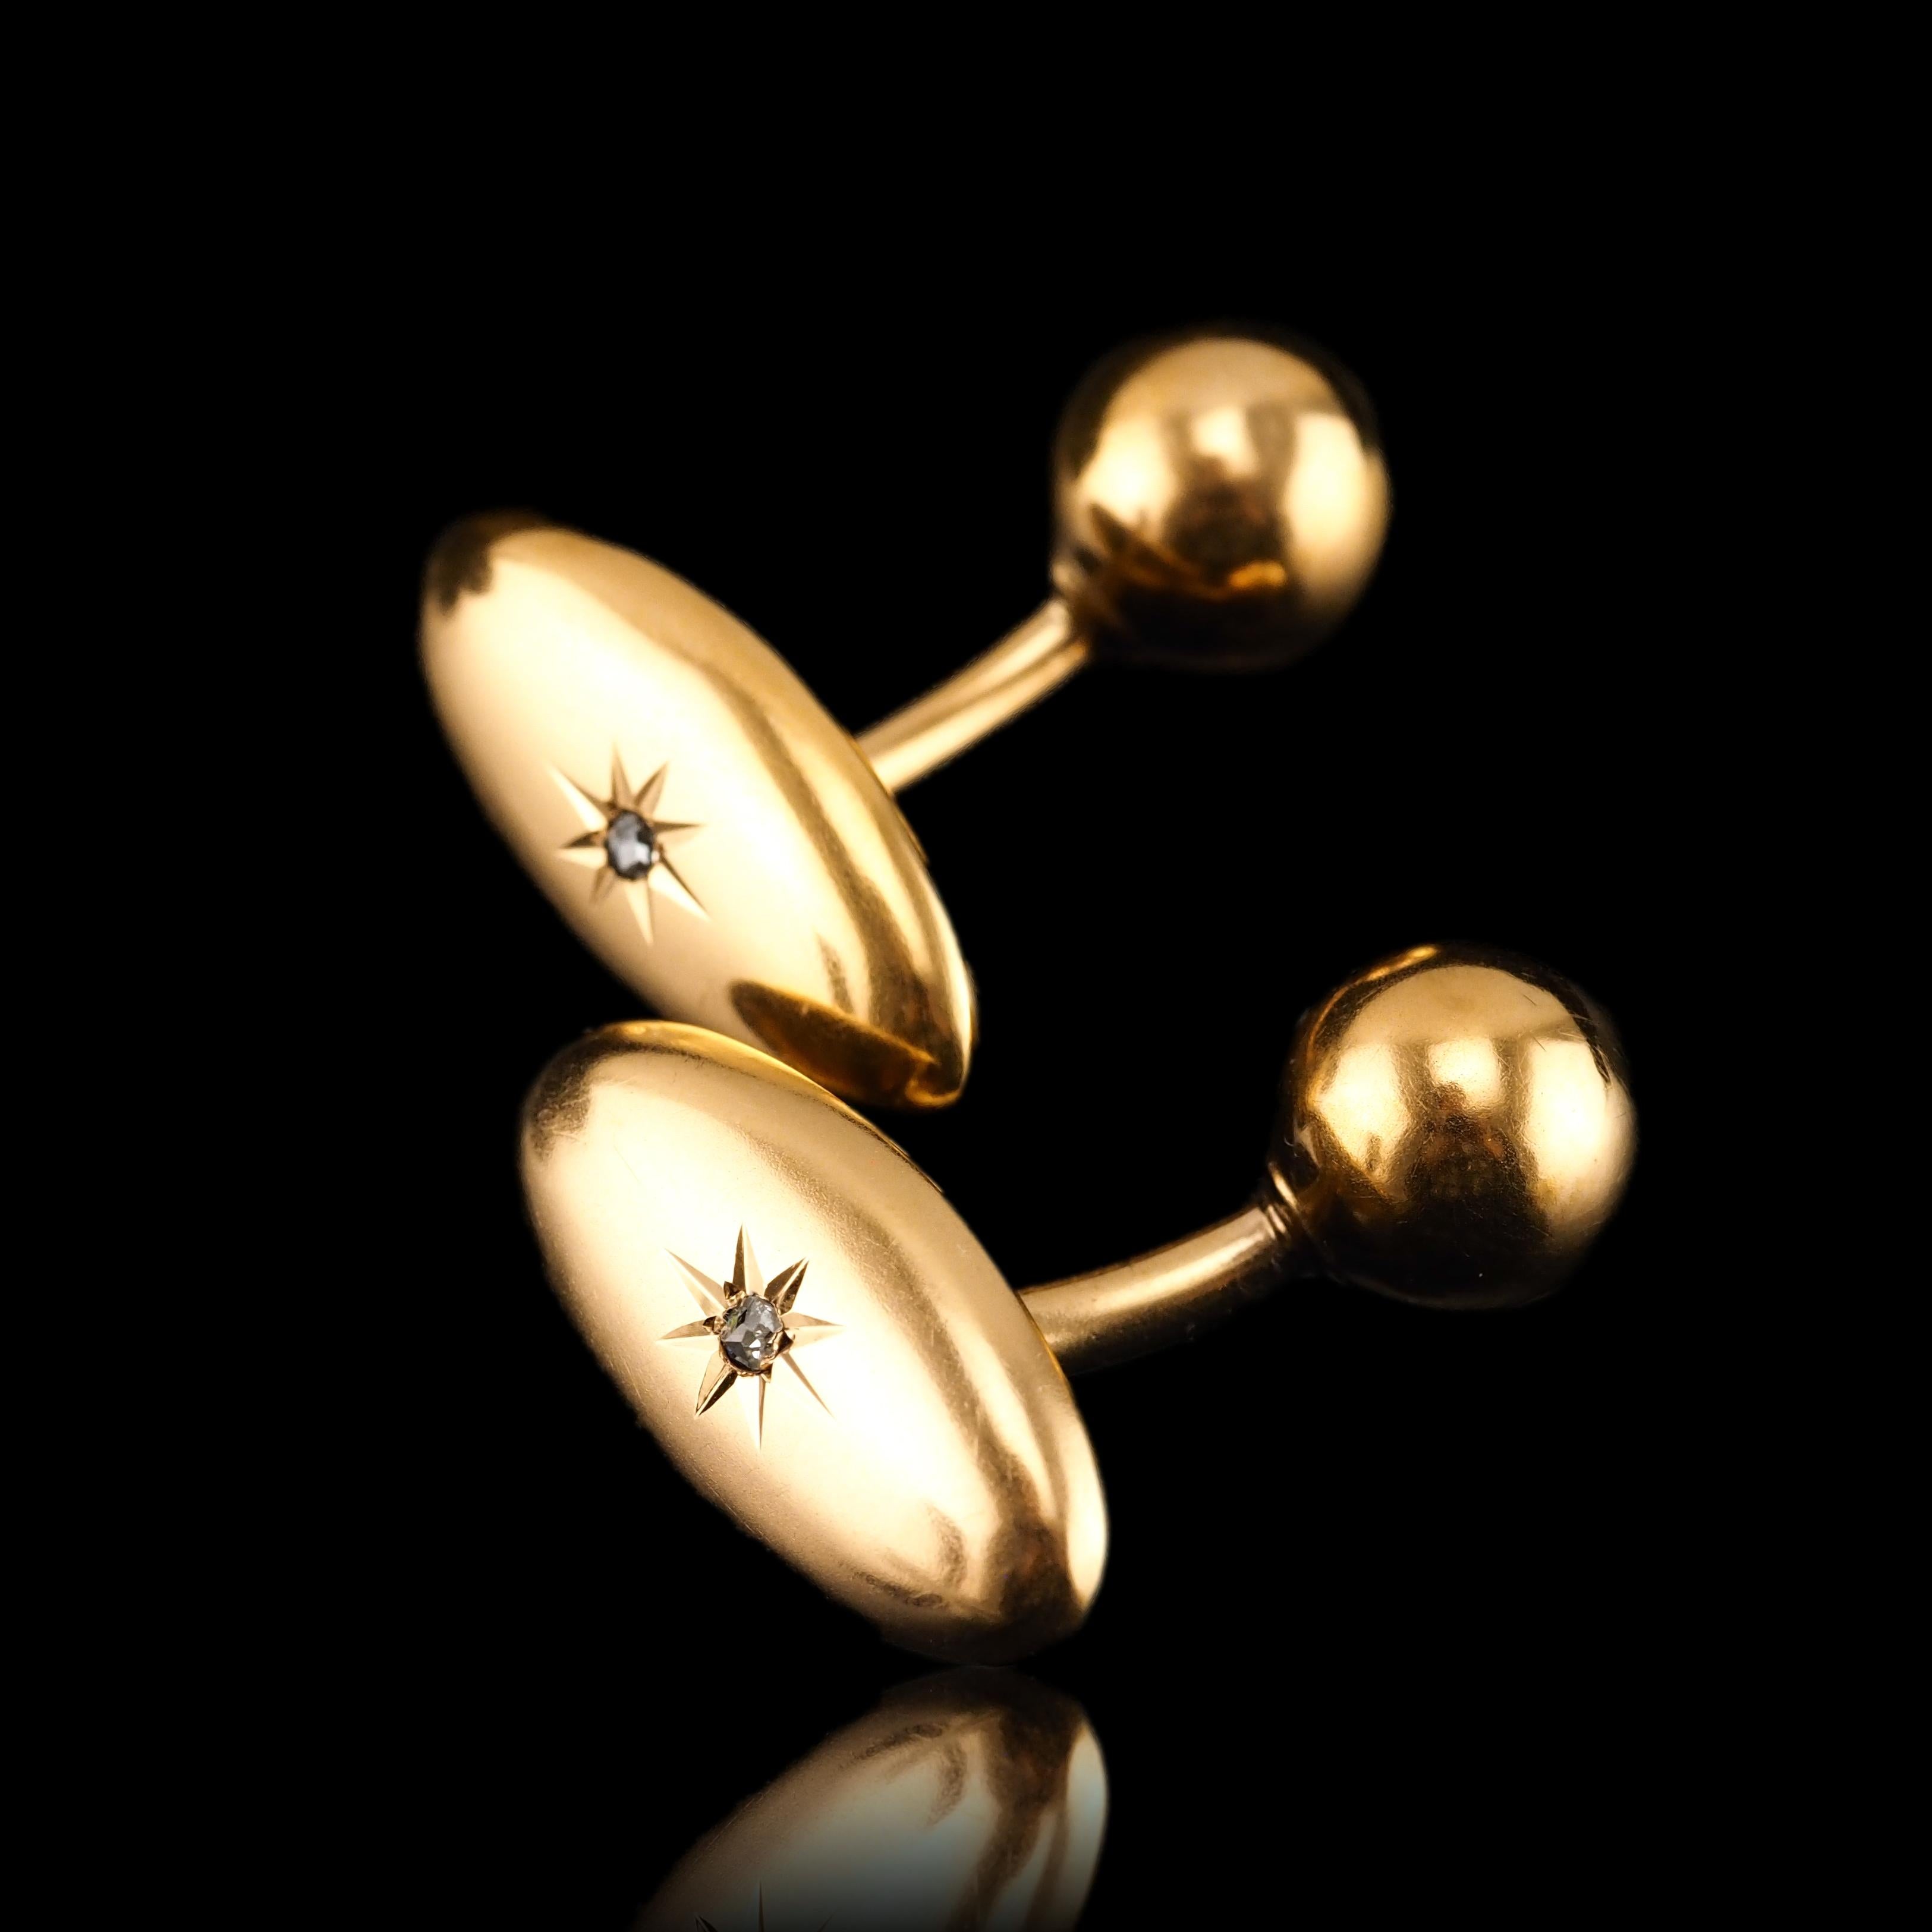 Antique Victorian 14K Gold Cufflinks with Rose Cut Diamond - c.1890 For Sale 9